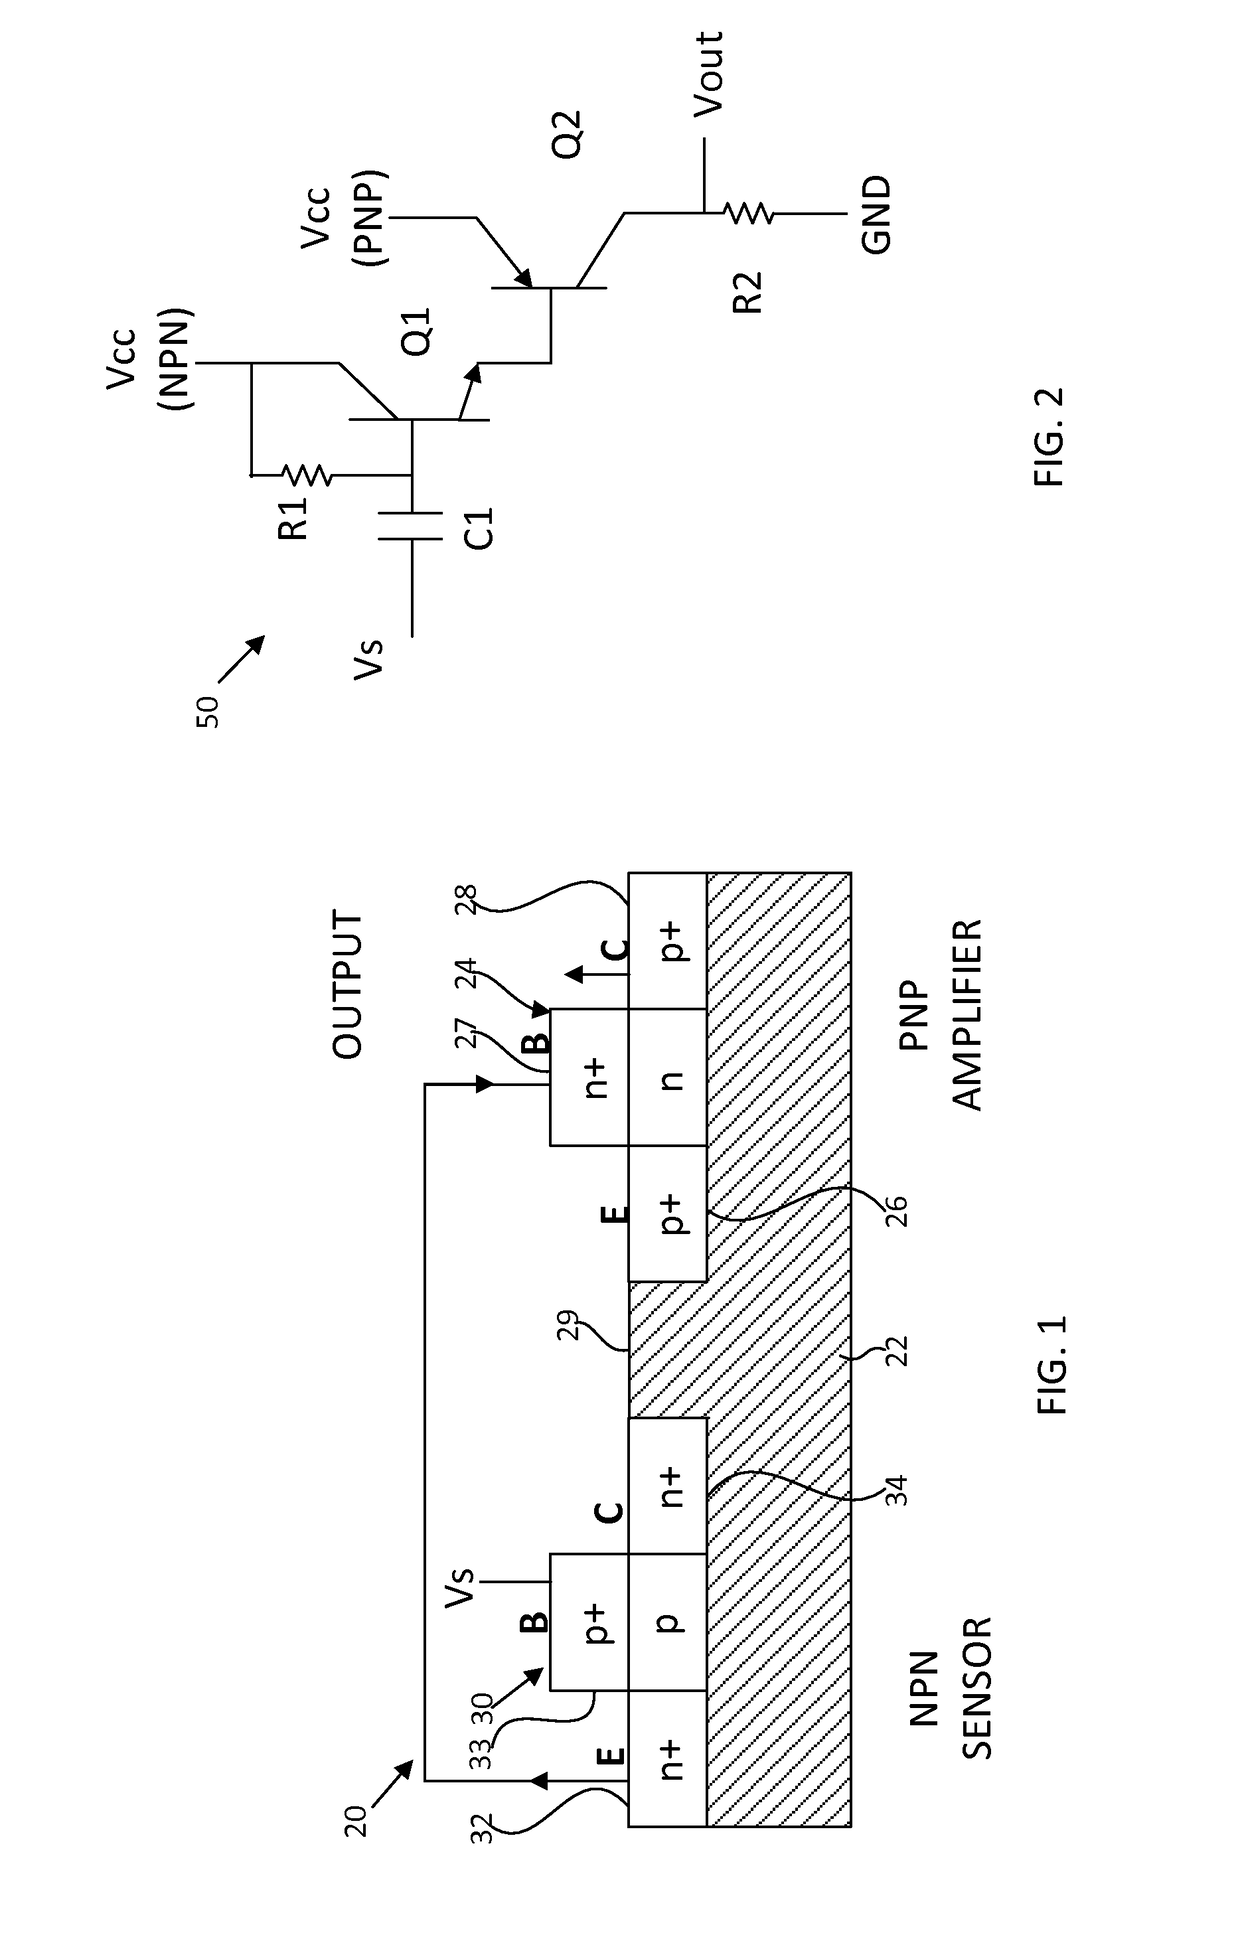 Sensors including complementary lateral bipolar junction transistors